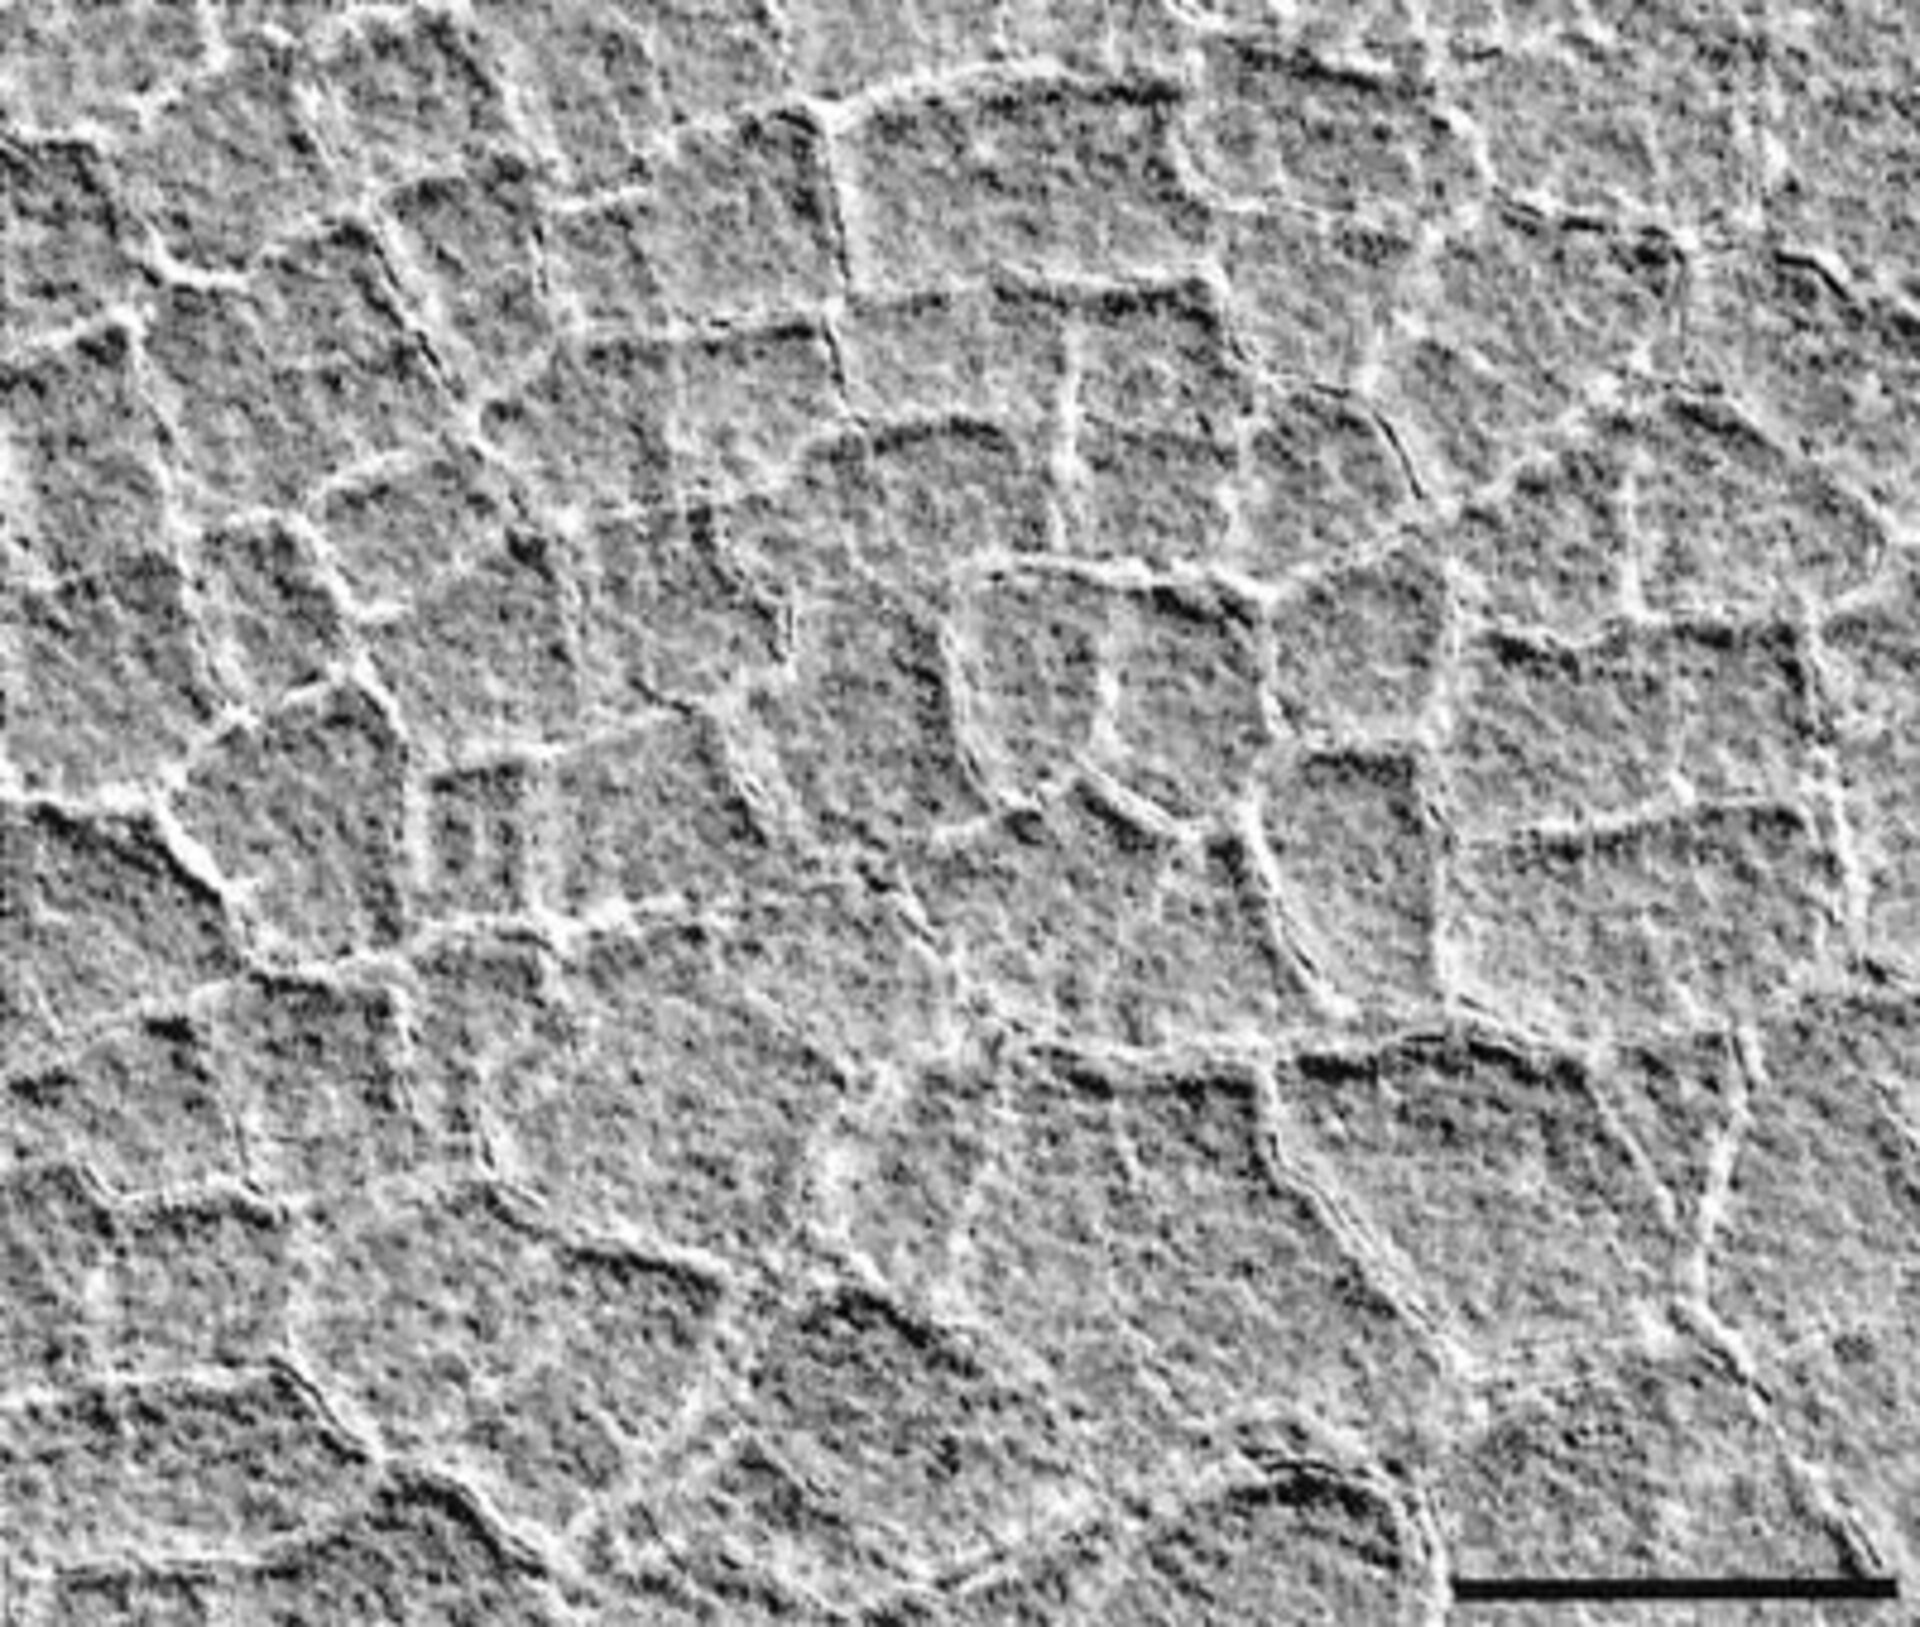 Cracks on Mars suggest the presence of water